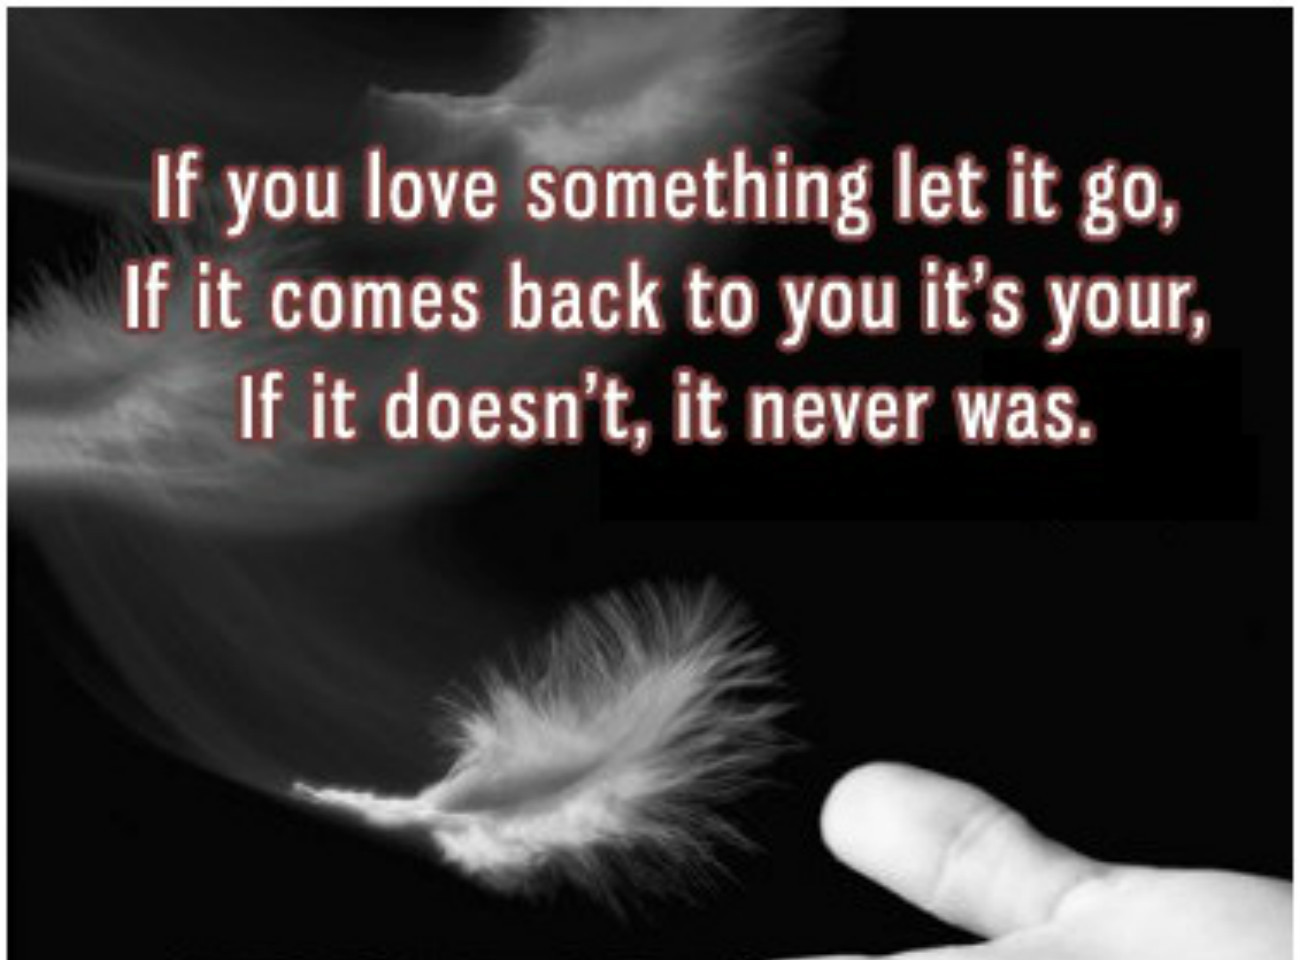 Quotes for leaving someone you love